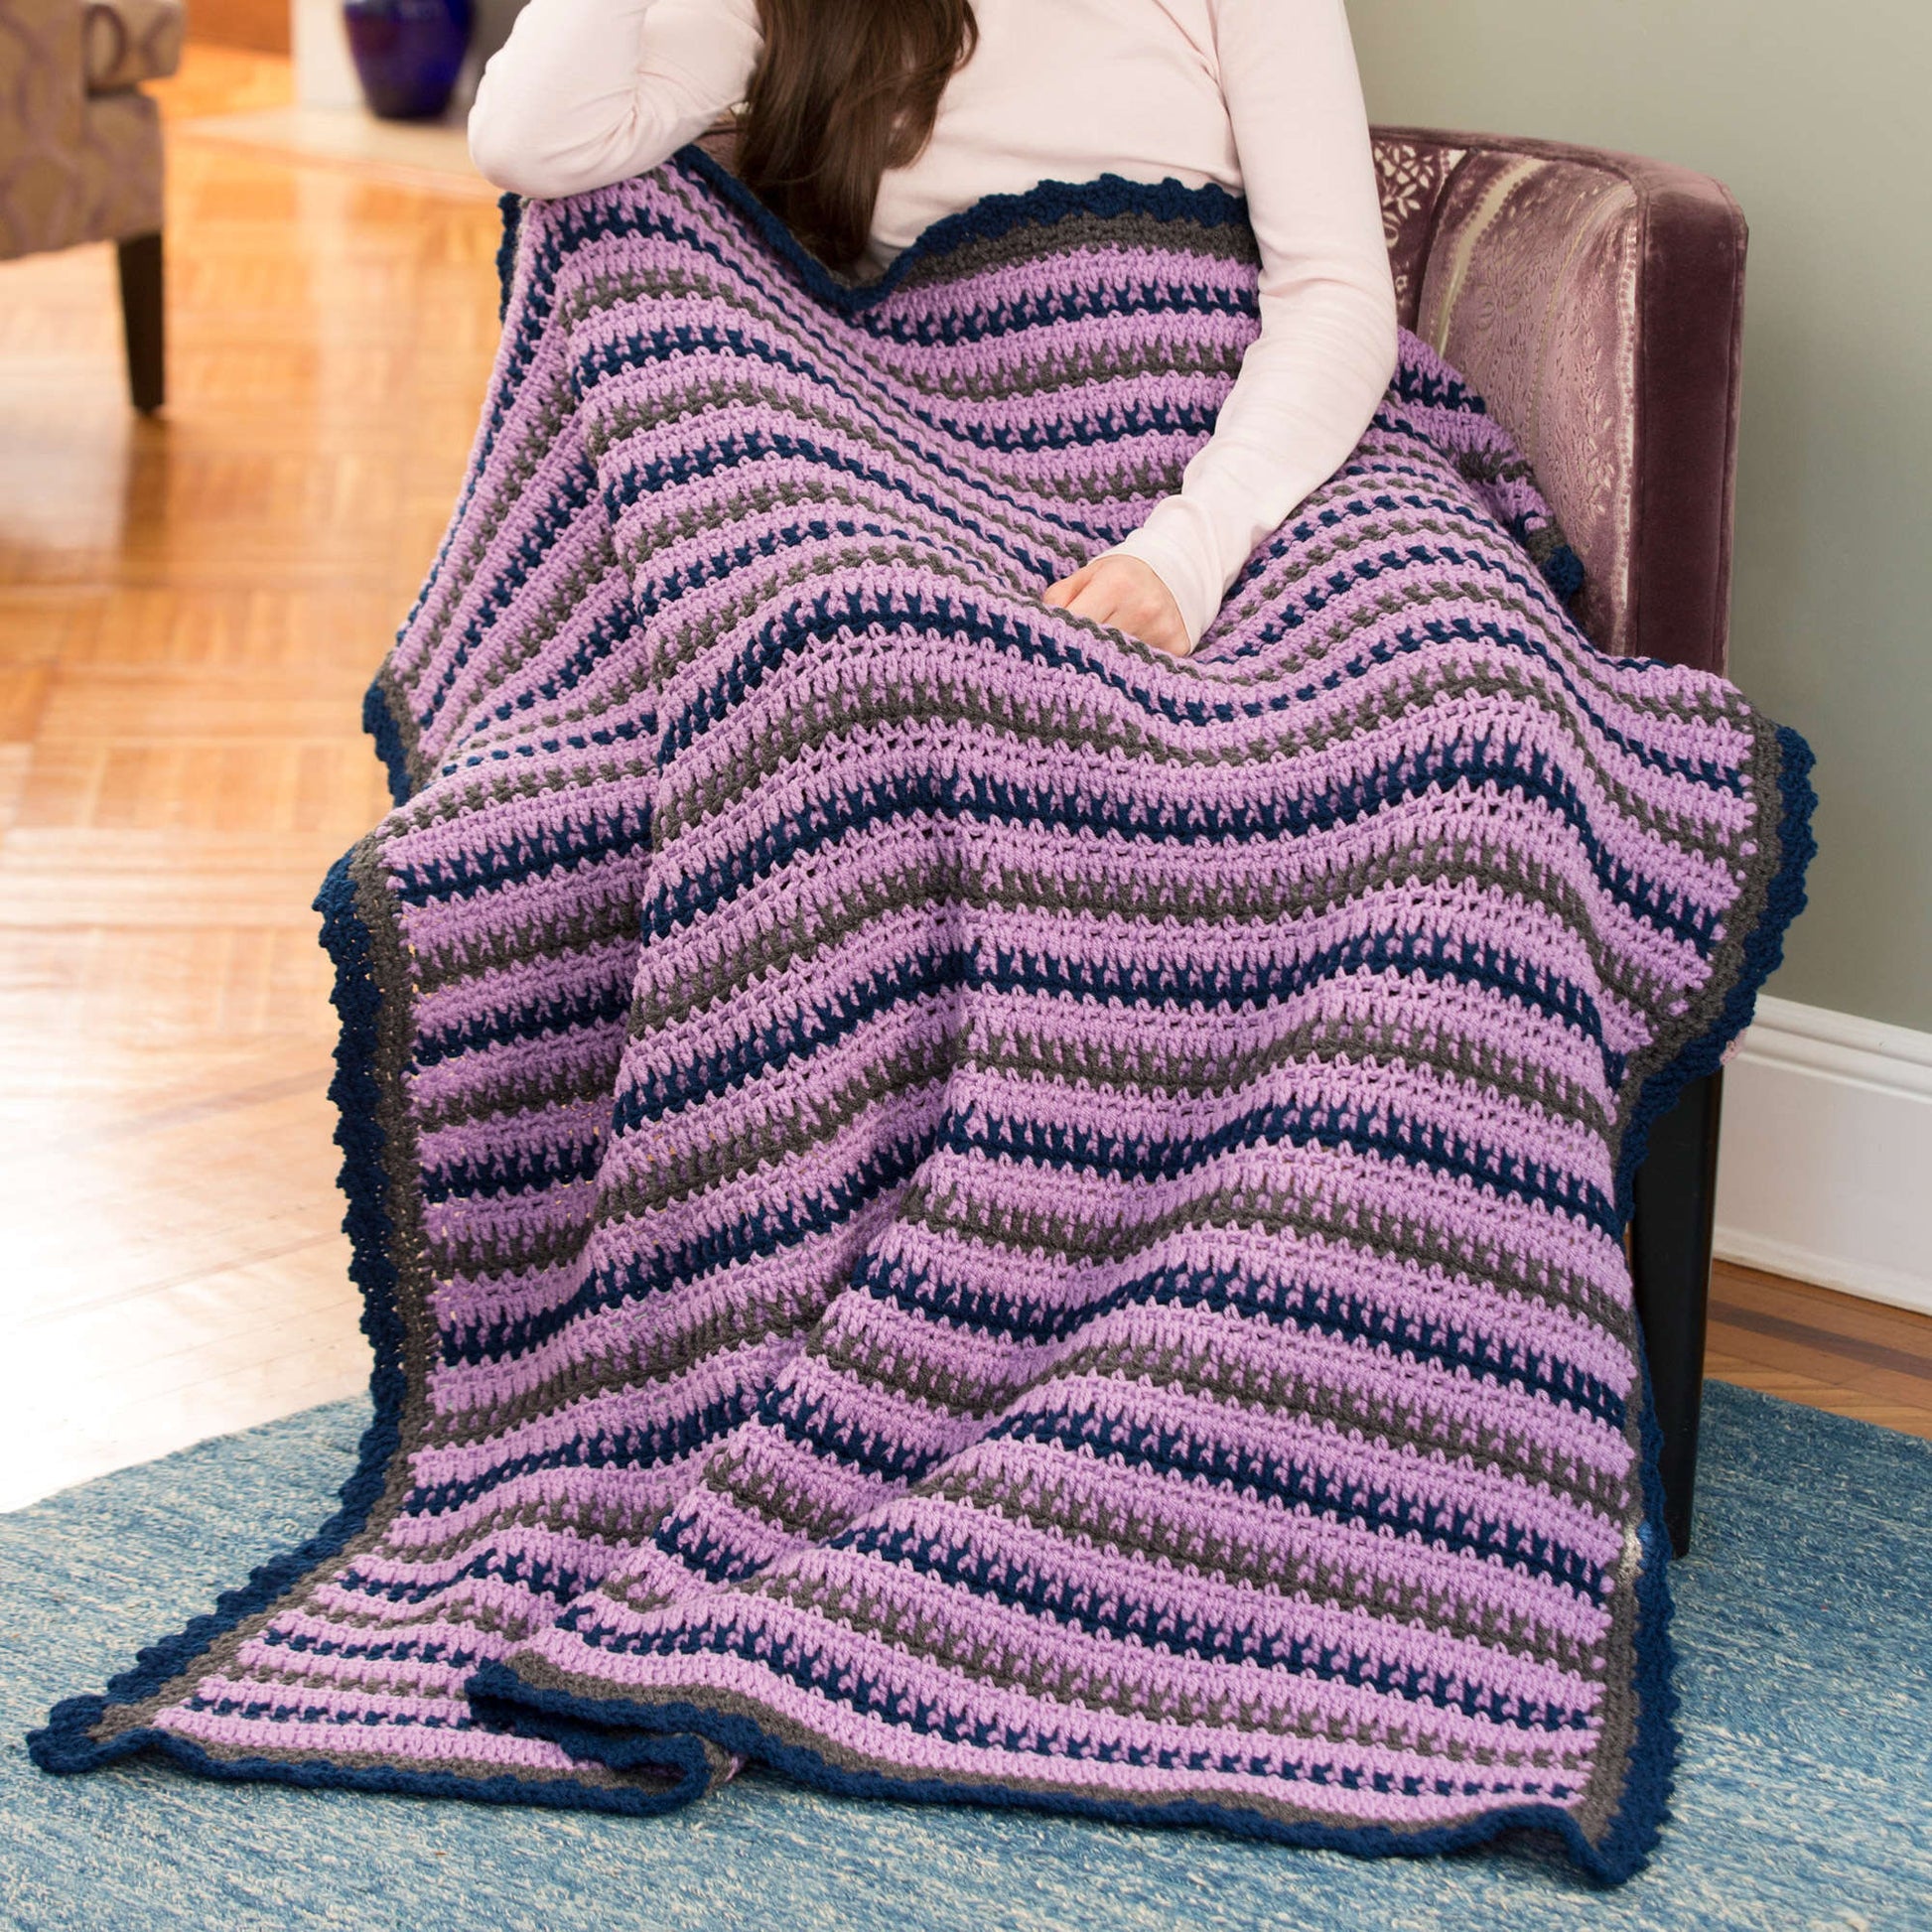 Free Red Heart Cozy Home Throw Crochet Pattern